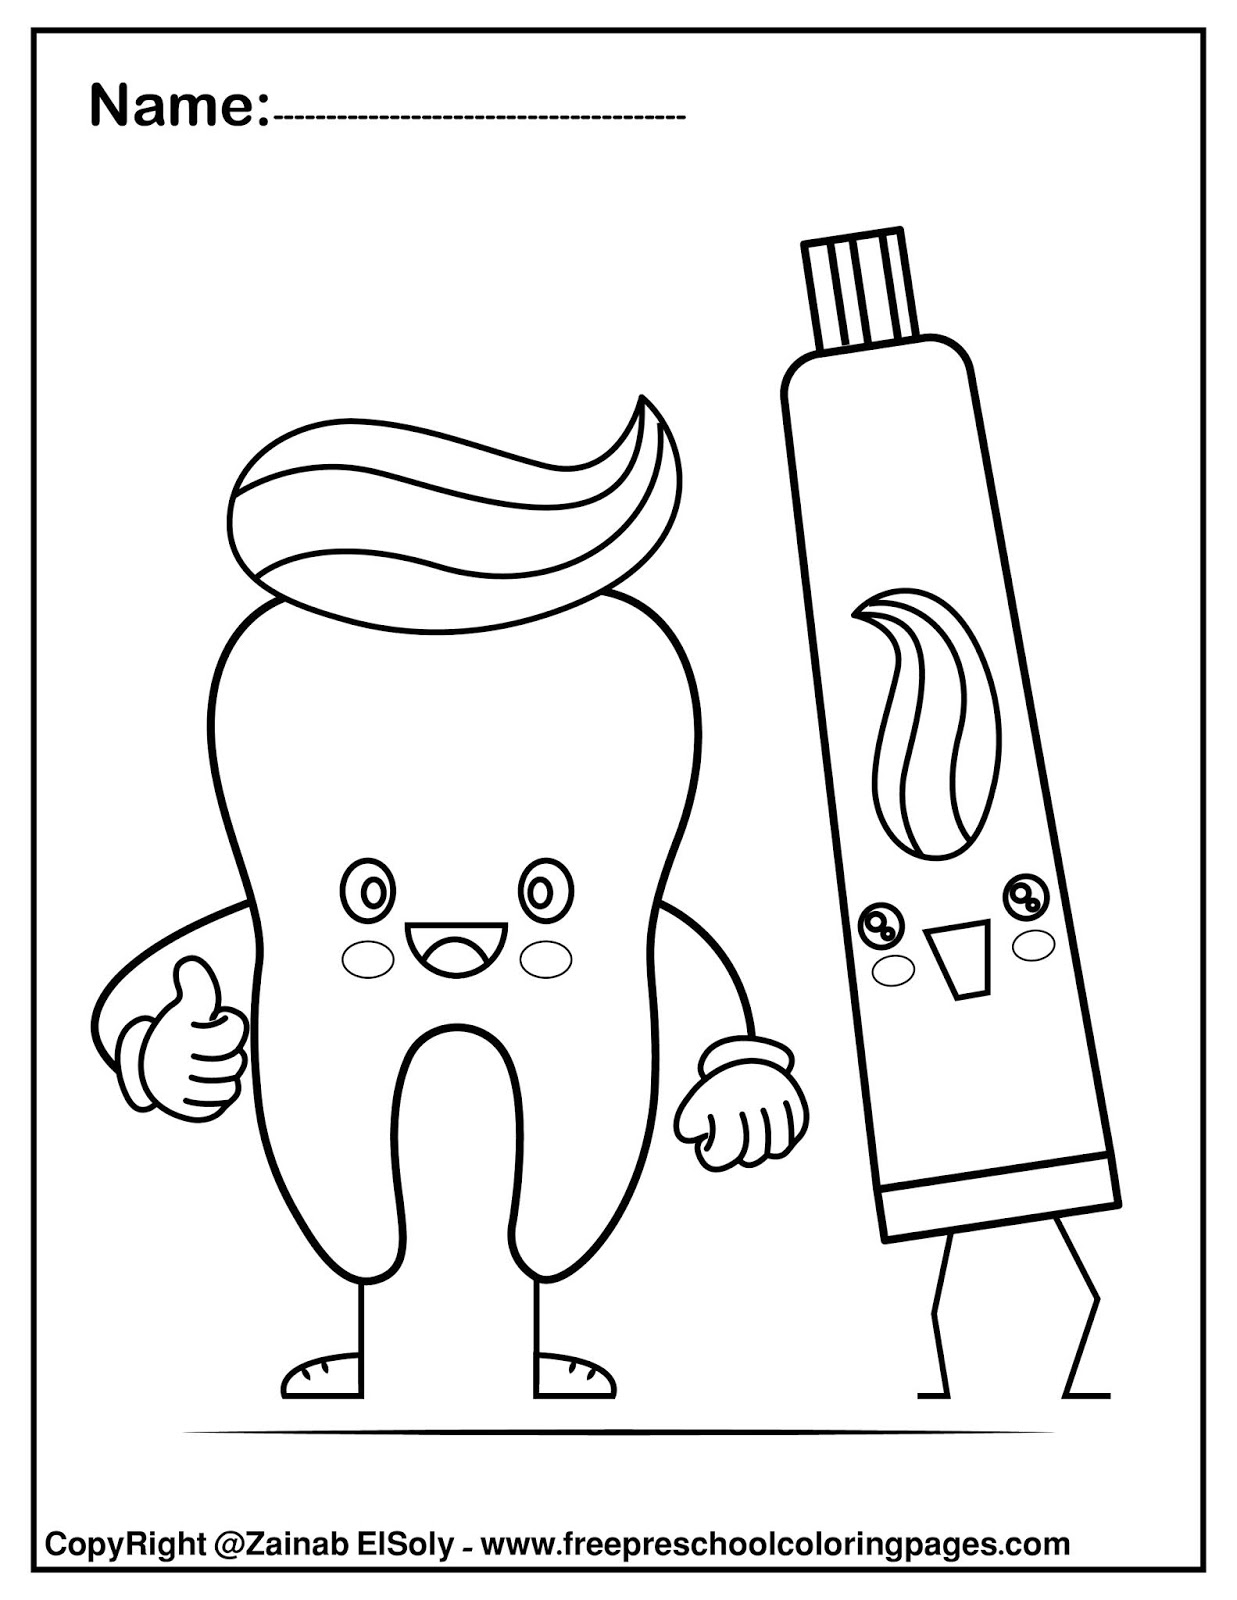 free-printable-dental-coloring-pages